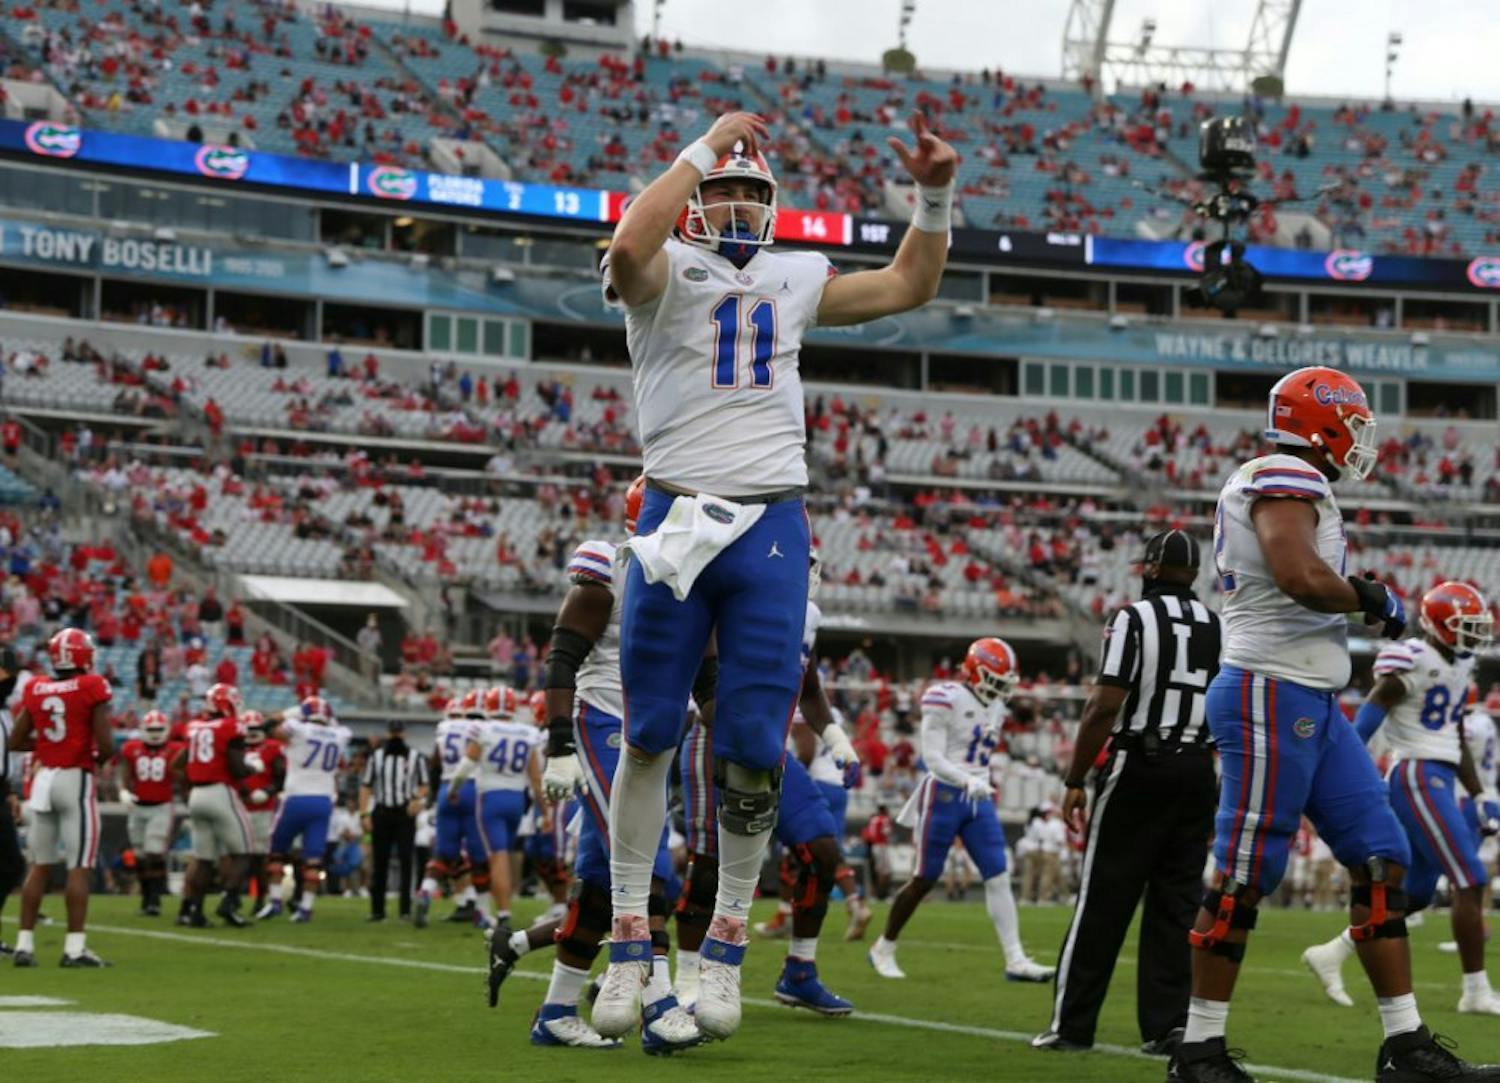 Florida quarterback Kyle Trask hypes up the crowd at TIAA Bank Stadium in Jacksonville, Florida, Saturday. The Gators defeated the Bulldogs in the most recent rivalry game on Nov. 7.